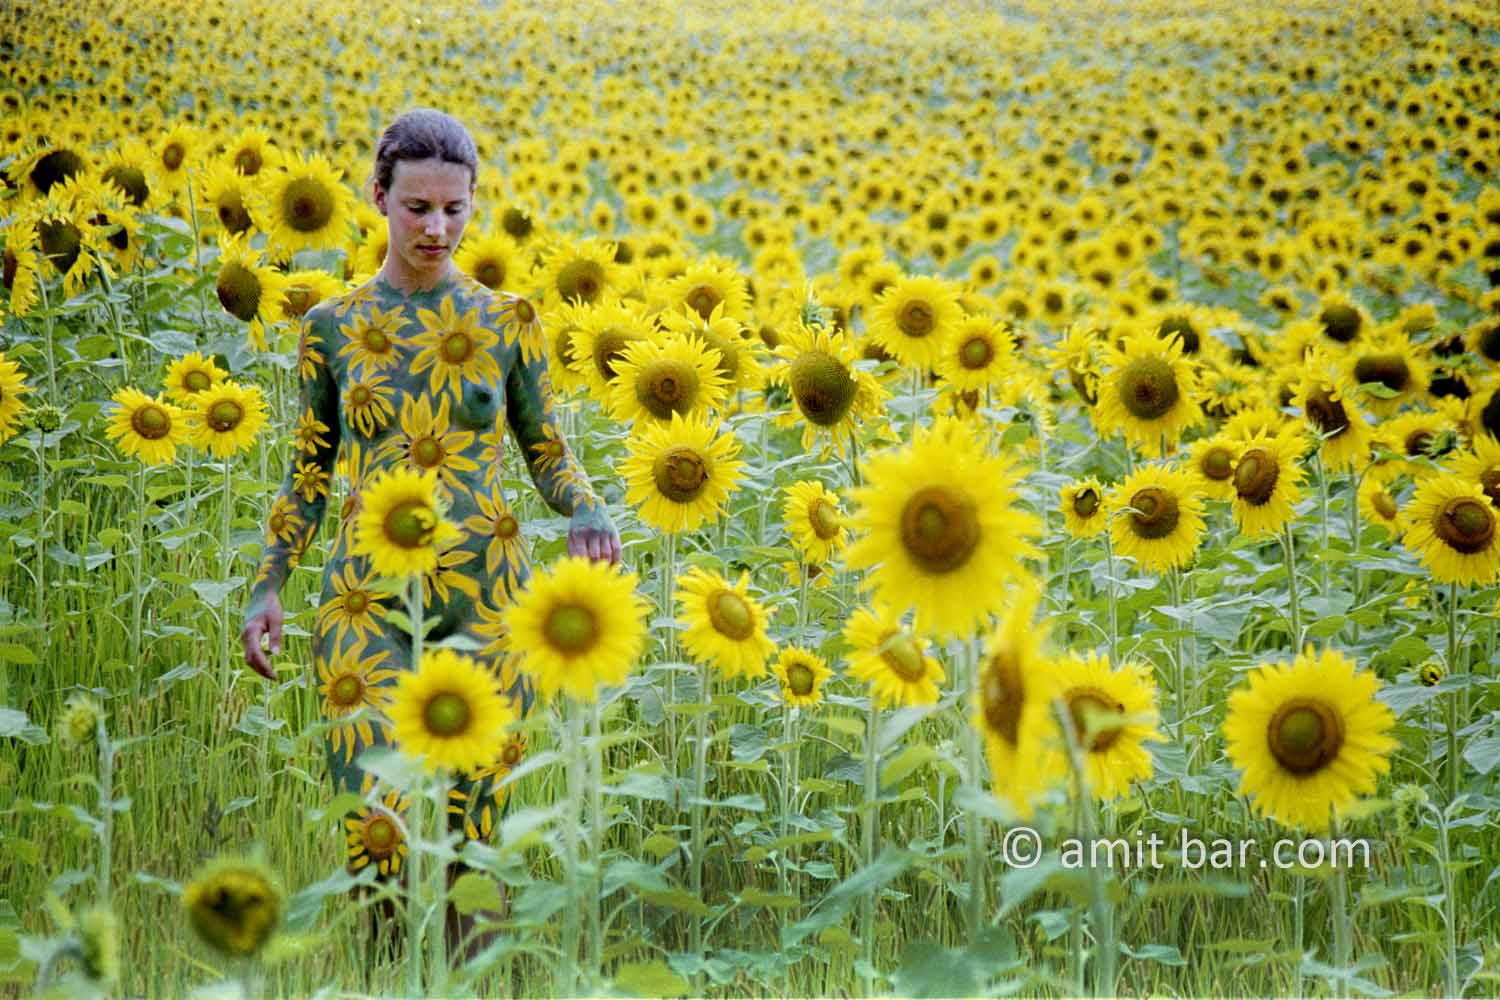 Sunflowers II: Body-painted model in the nature at Gaillac-Toulza, Midi-Pyrénées, France